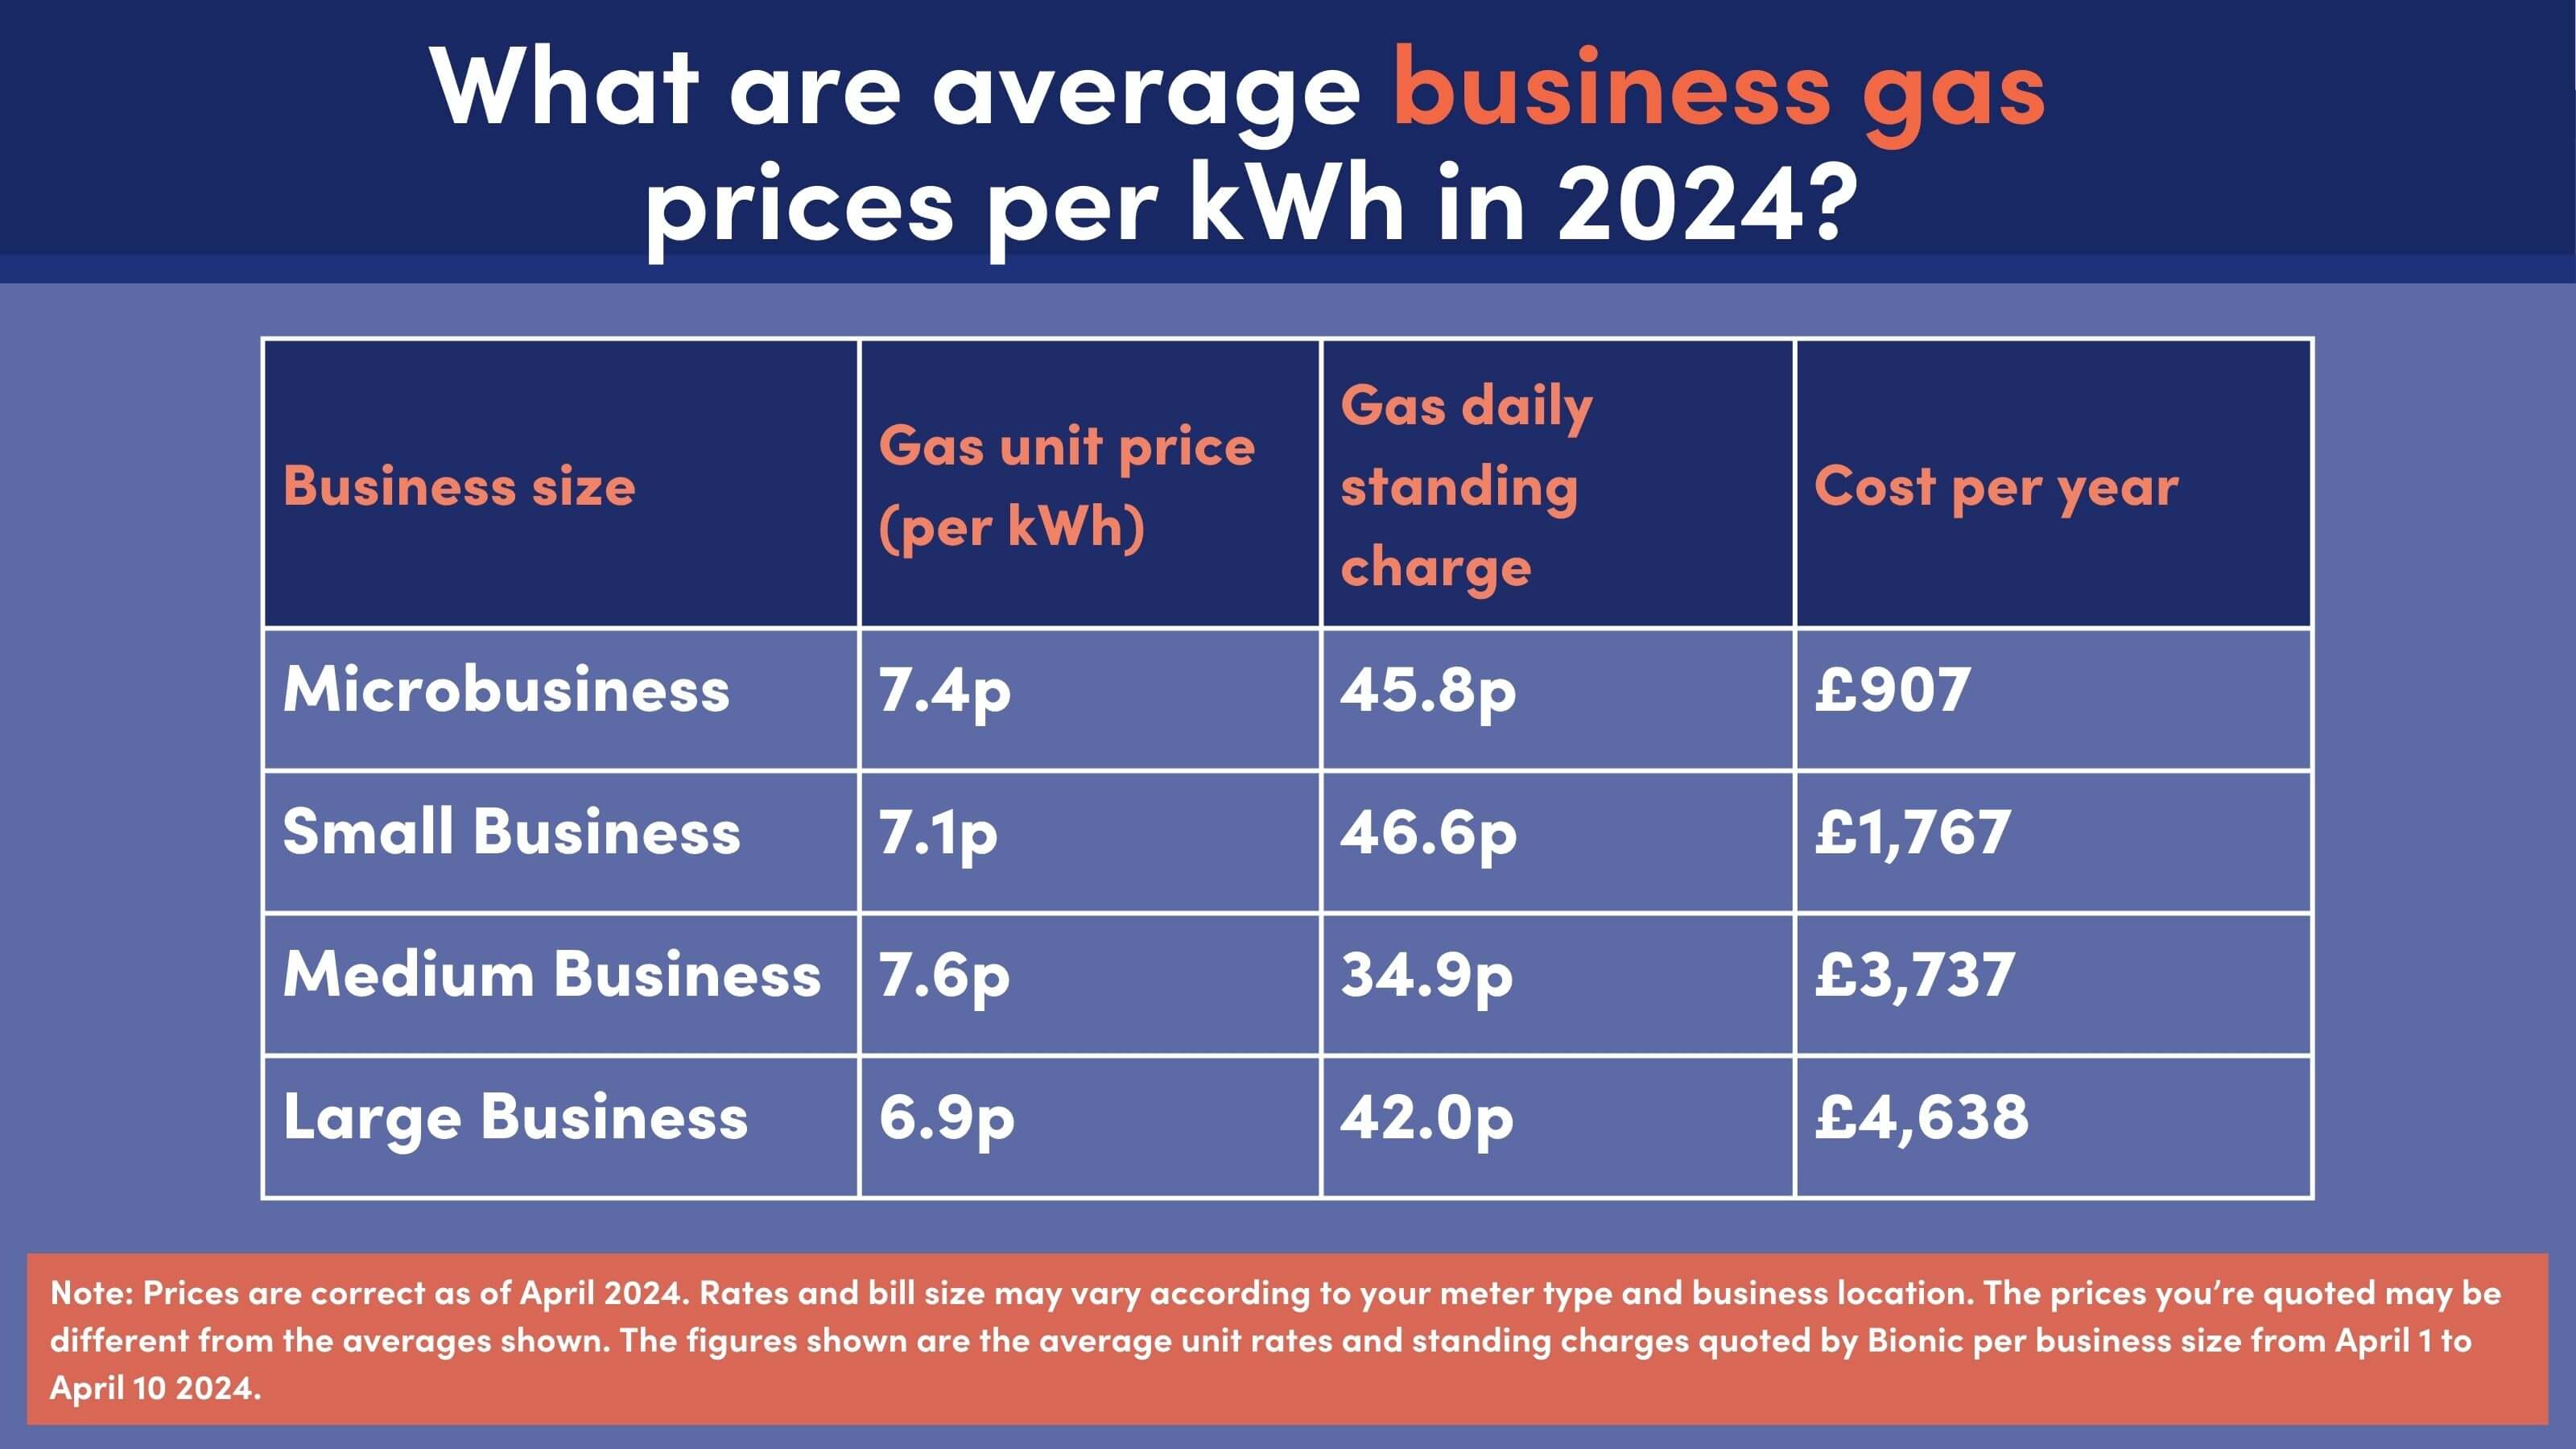 Average business gas prices per KWH April 2024